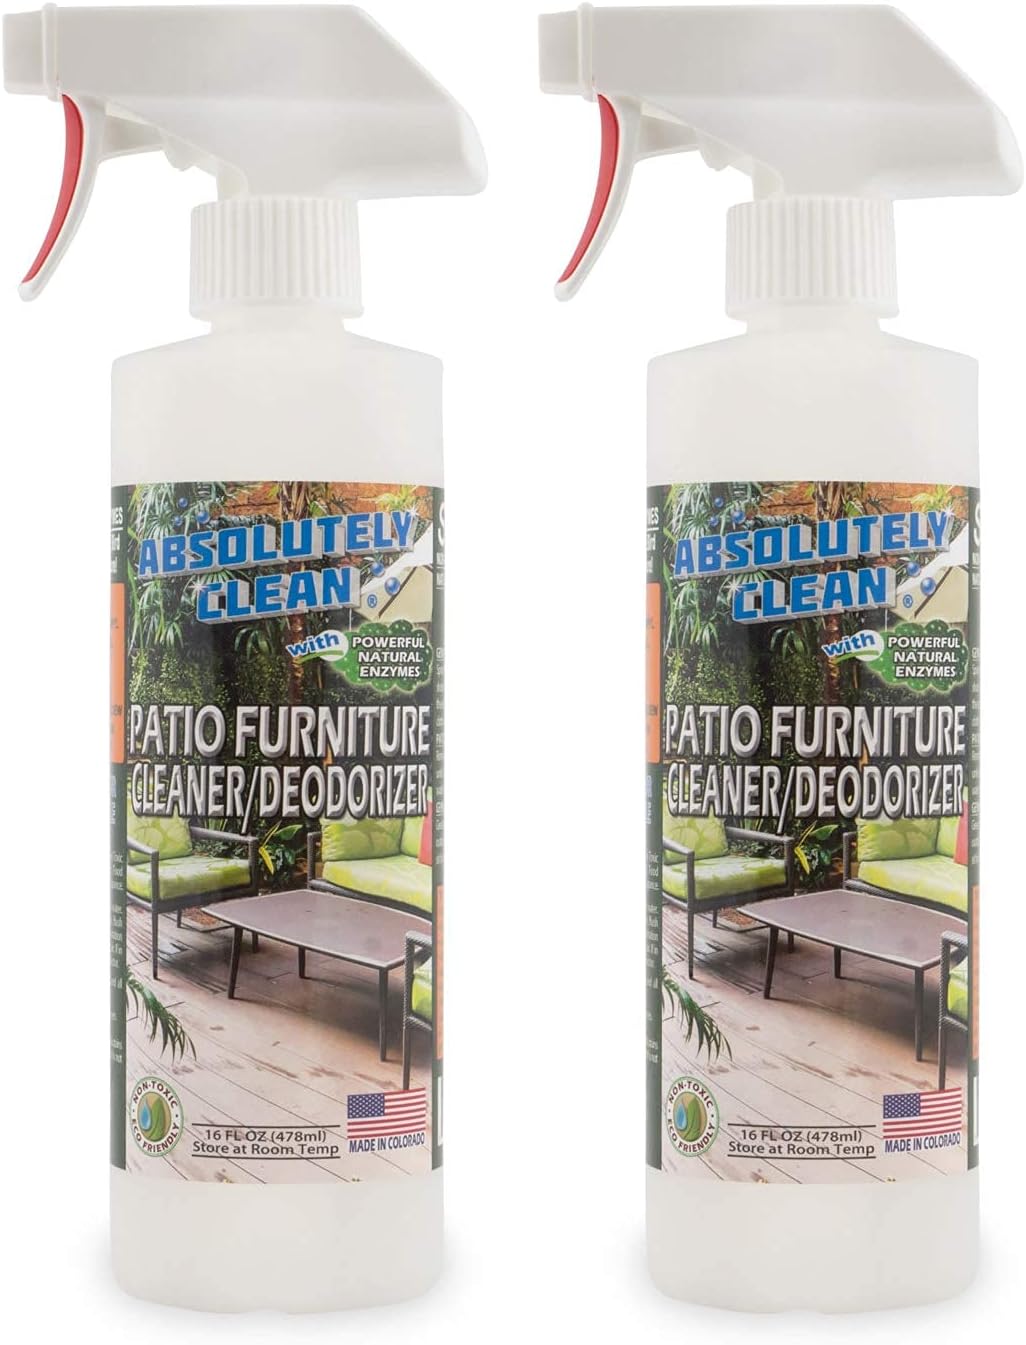 Amazing Patio Furniture Cleaner - Natural Enzymes [...]